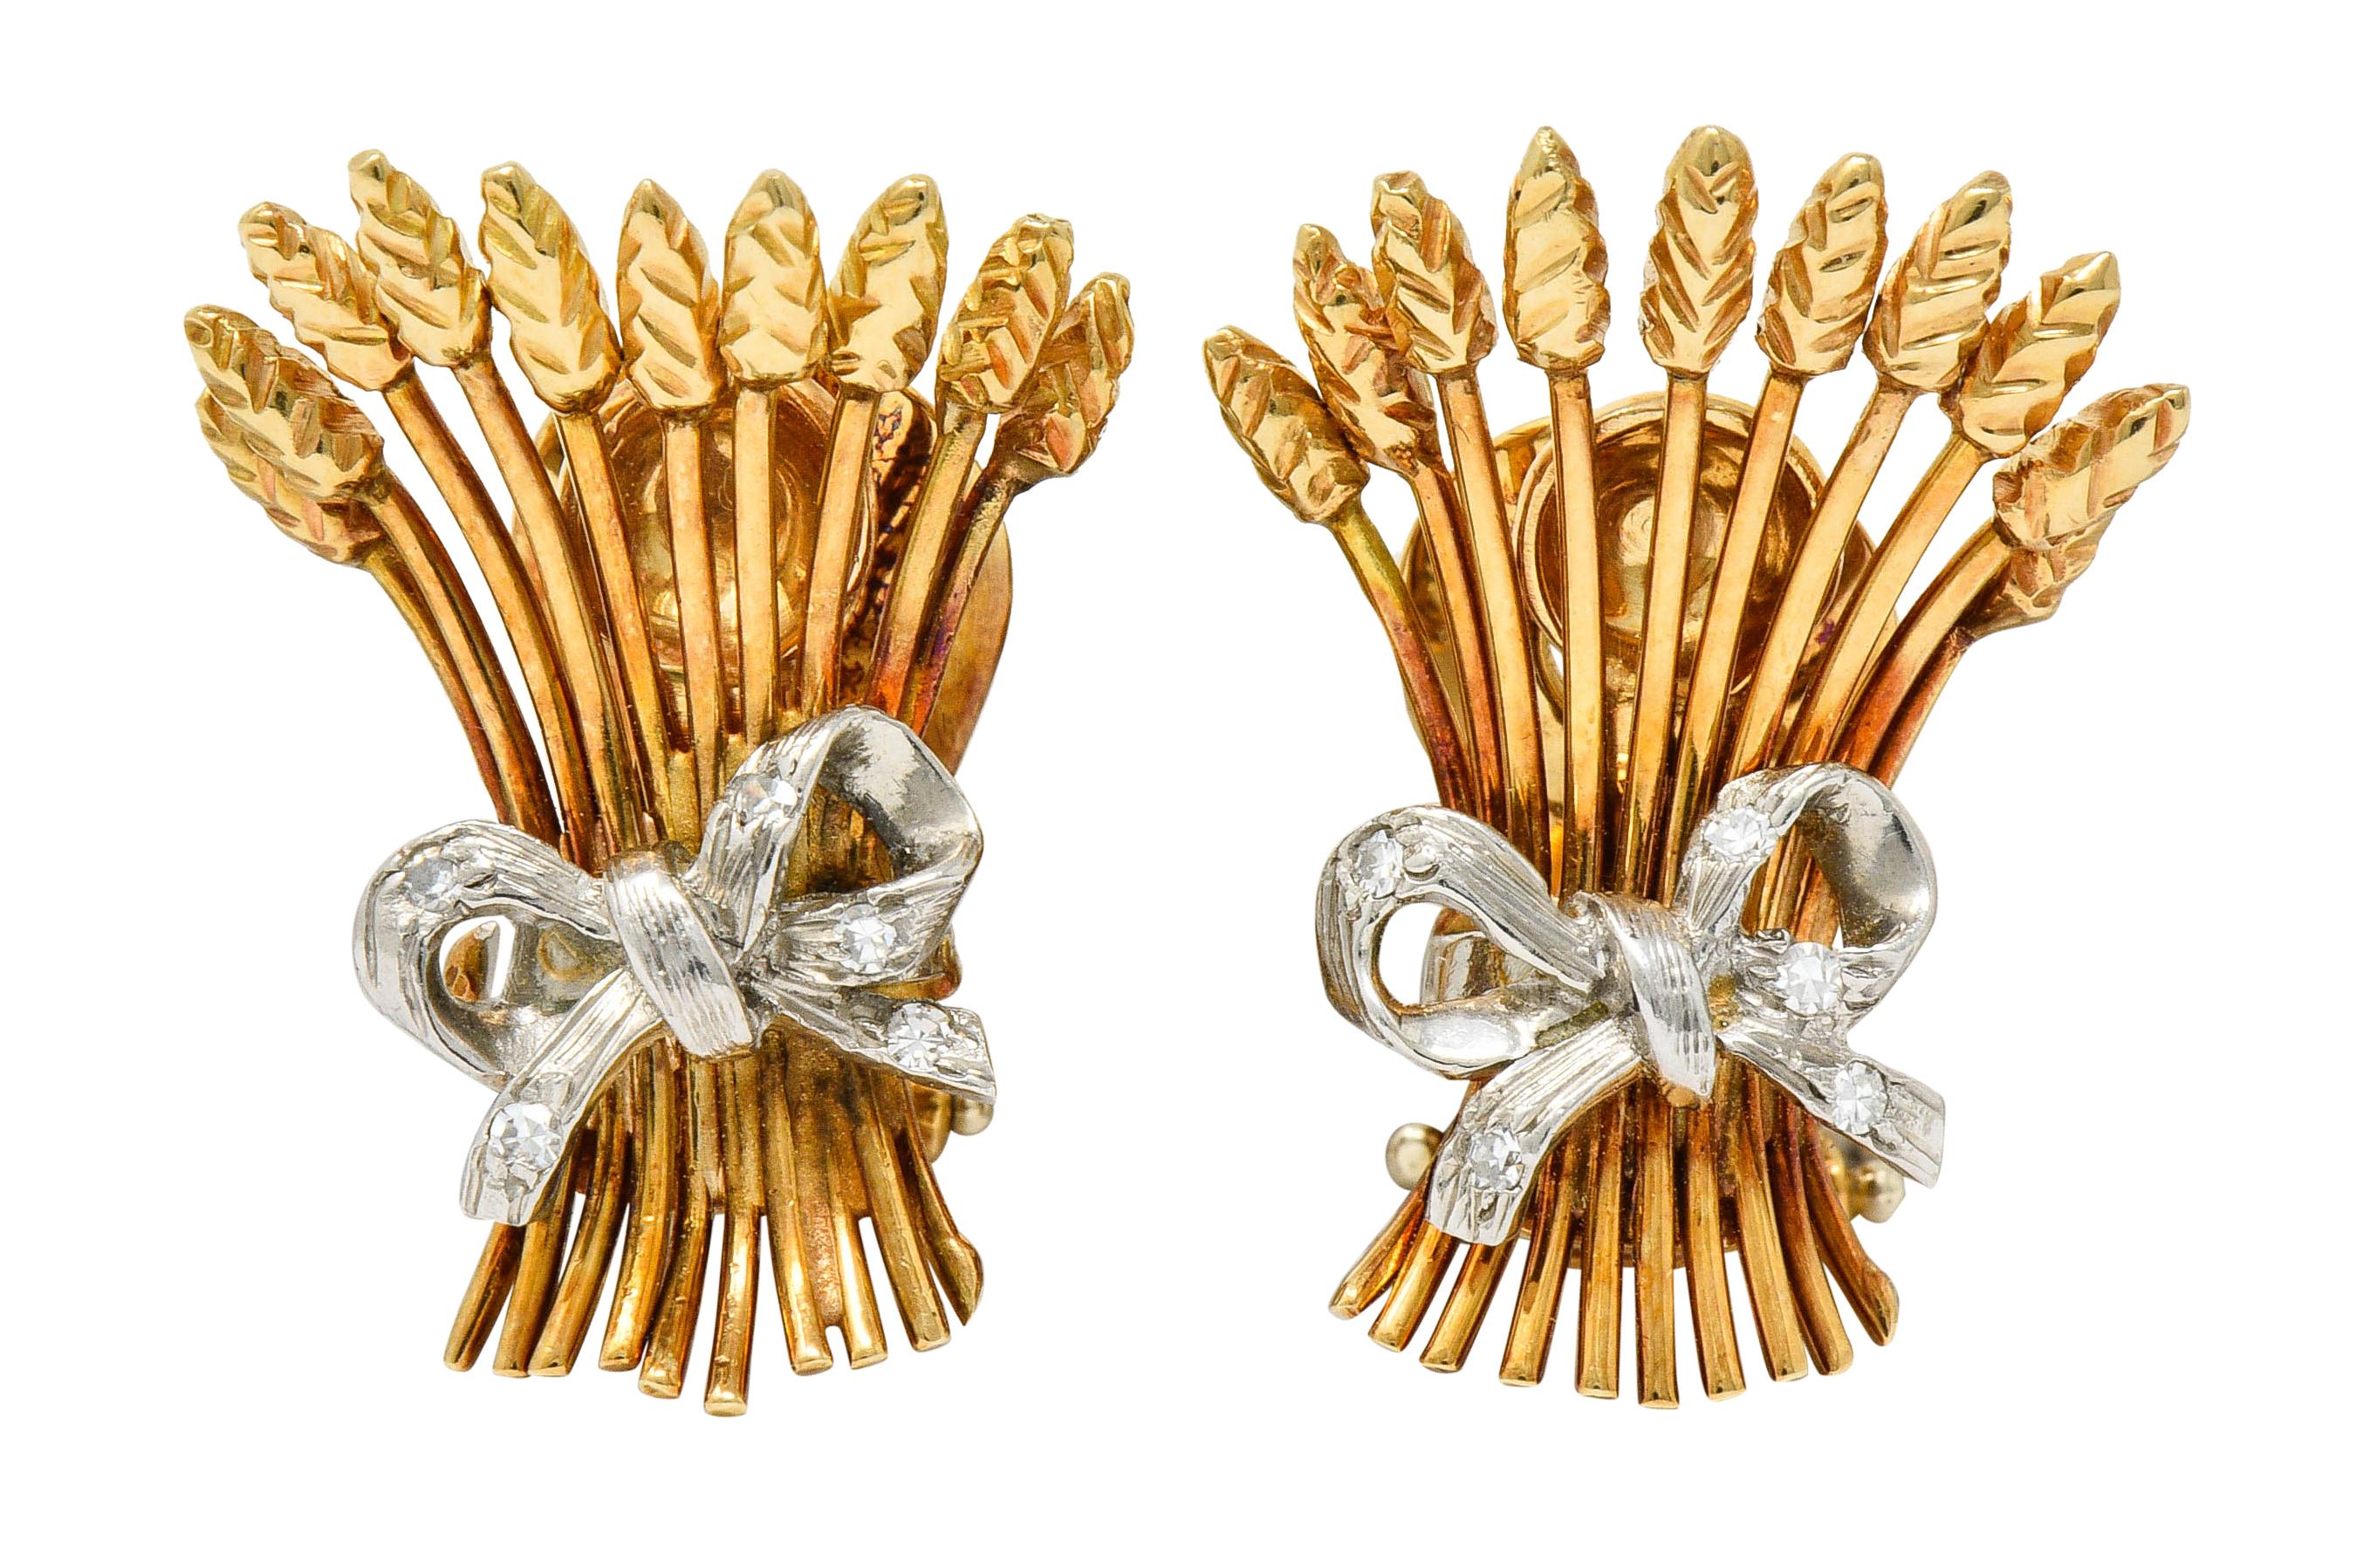 Designed as bundles of polished gold wheat cinched by a platinum ribbon

Accented by transitional and single cut diamonds weighing in total approximately 0.95 carat; G to I color with SI clarity

Earrings are completed by hinged omega backs

Brooch